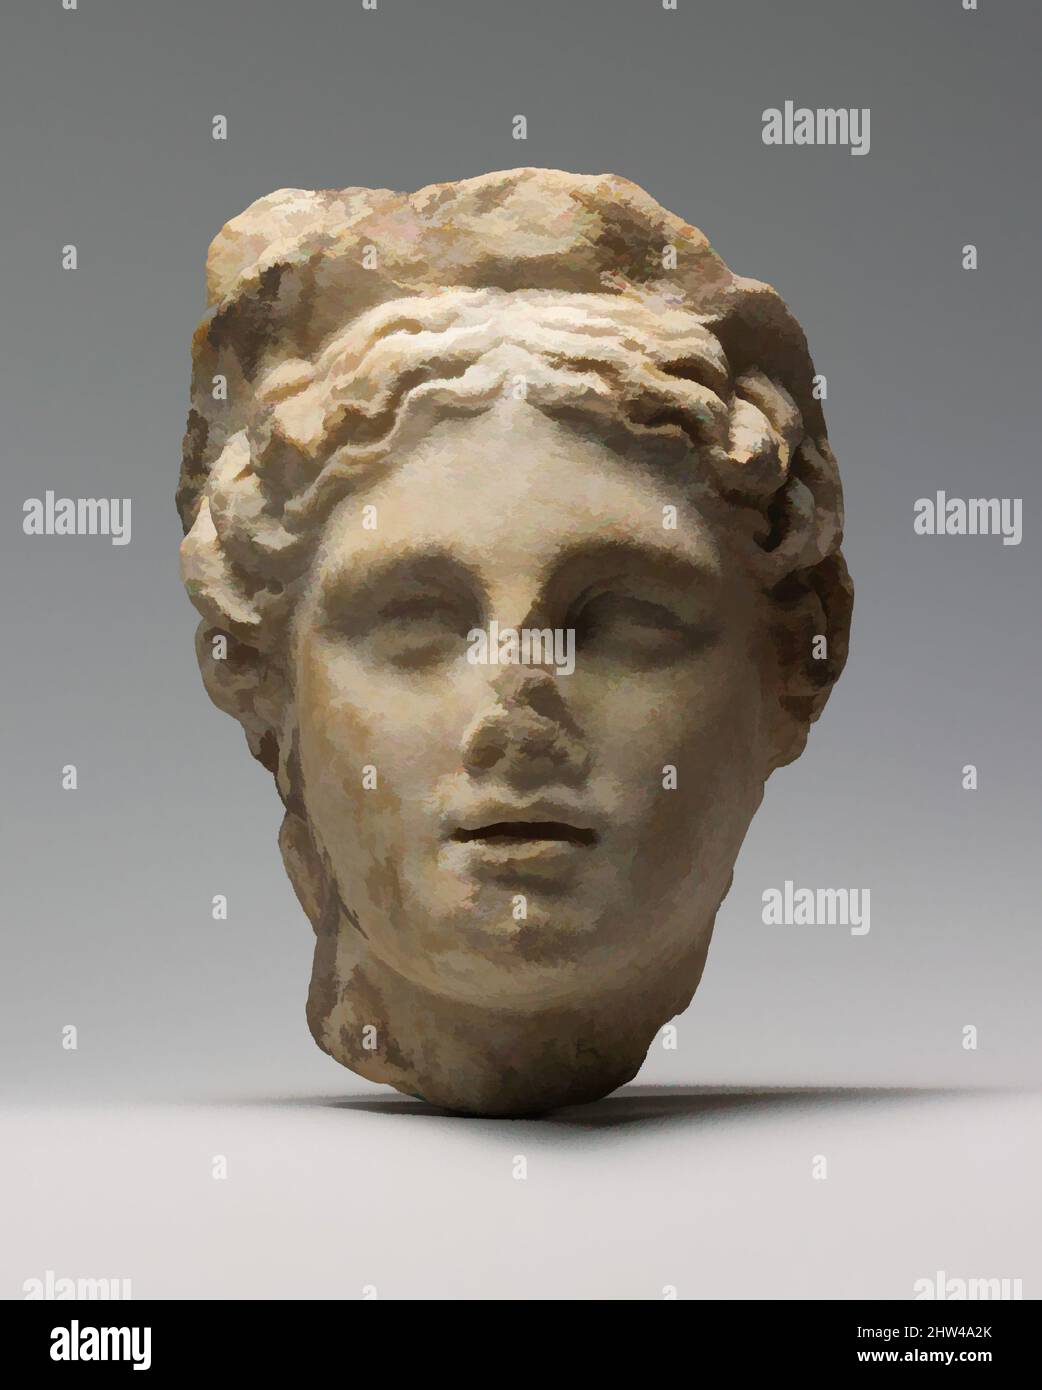 images Roman photography personification hi-res Alamy - stock and